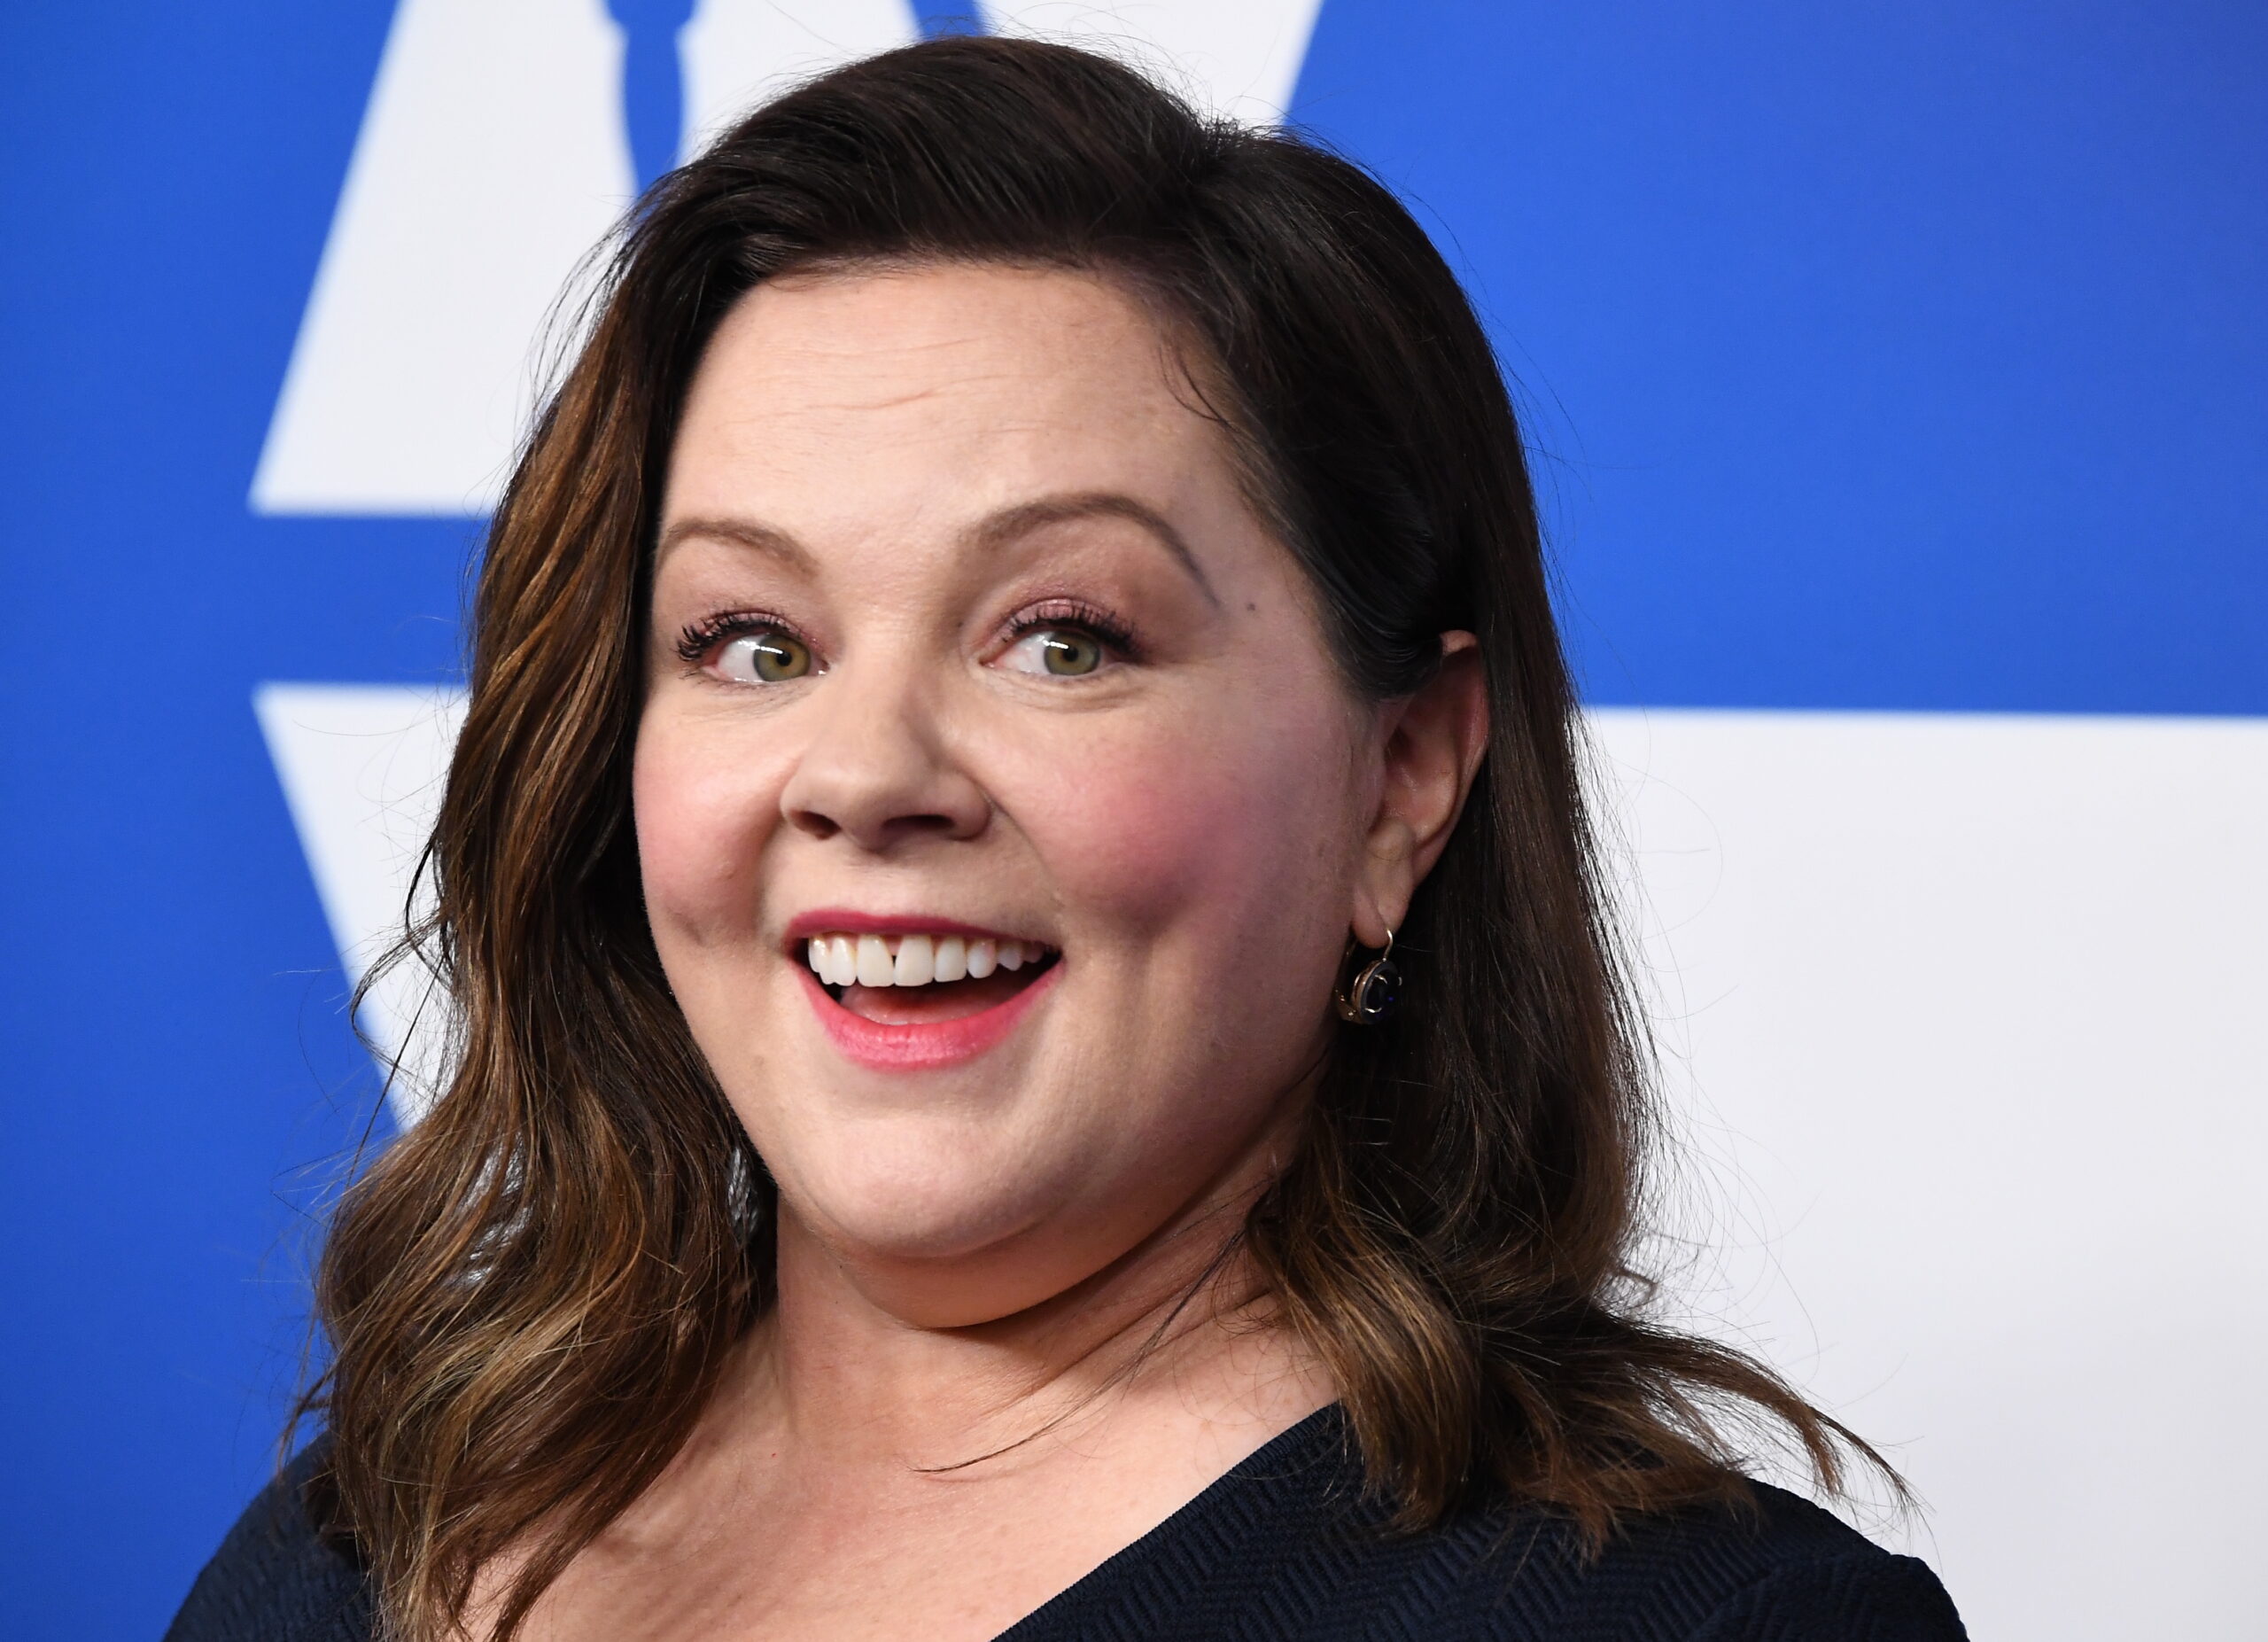 ‘Entertained By Drag Your Whole Life’: ‘Bridesmaids’ Star Melissa McCarthy Divides Fans With Instagram Photos